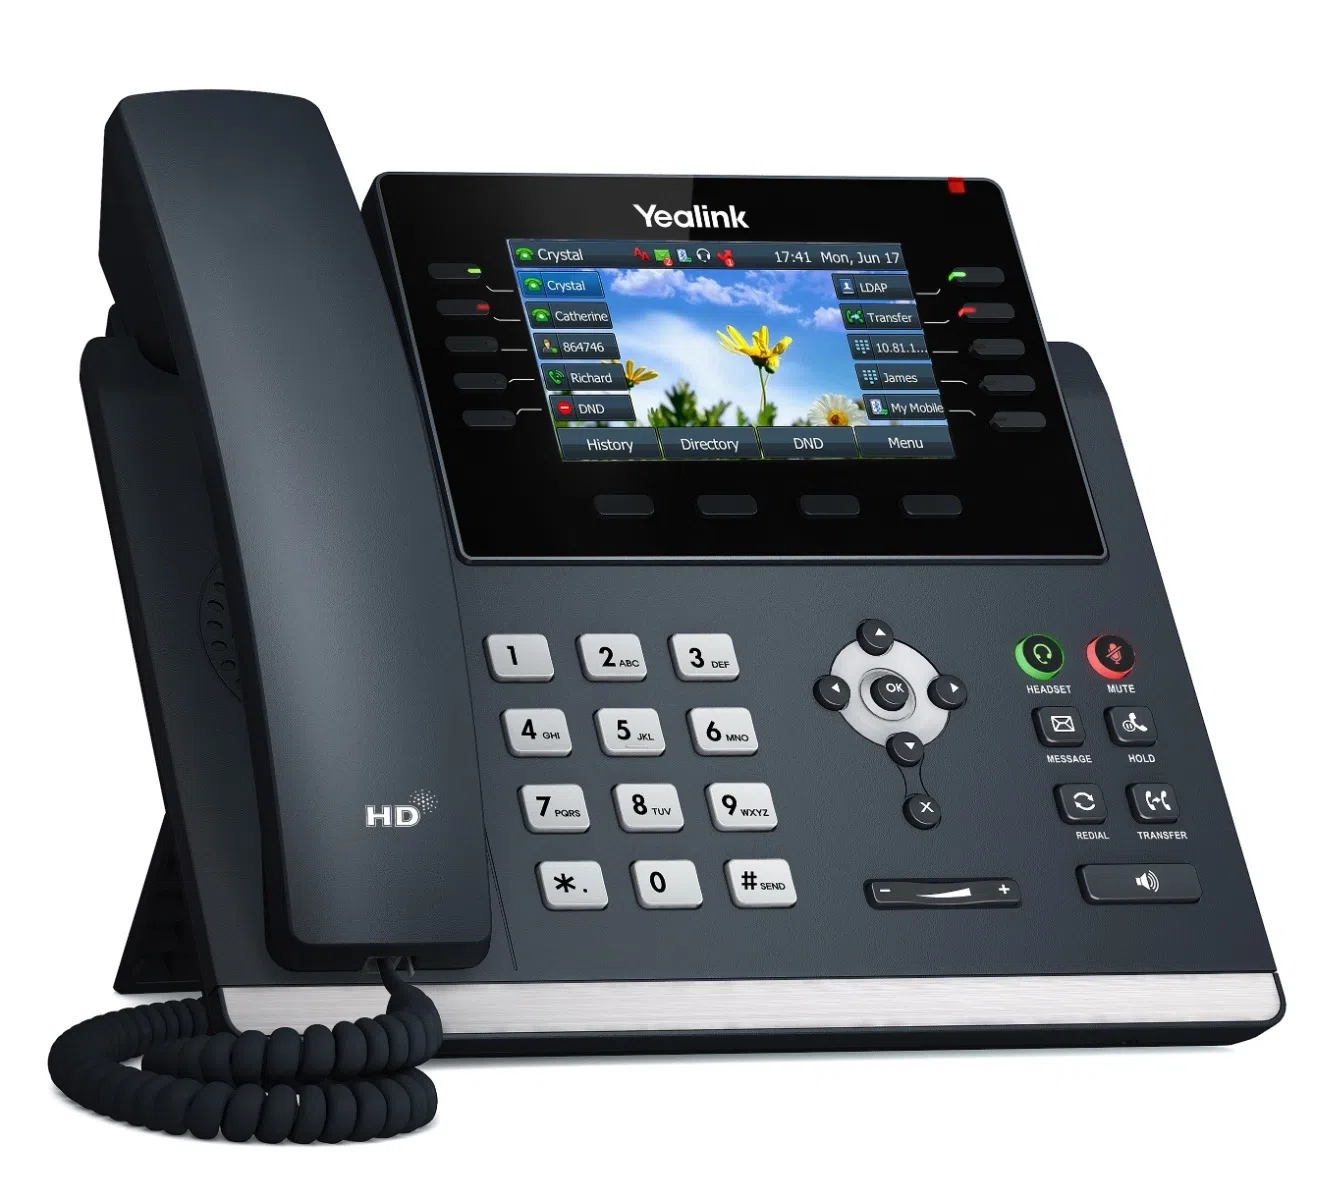 What is the VoIP Supply SKU of the Yealink SIP-T46U IP phone?